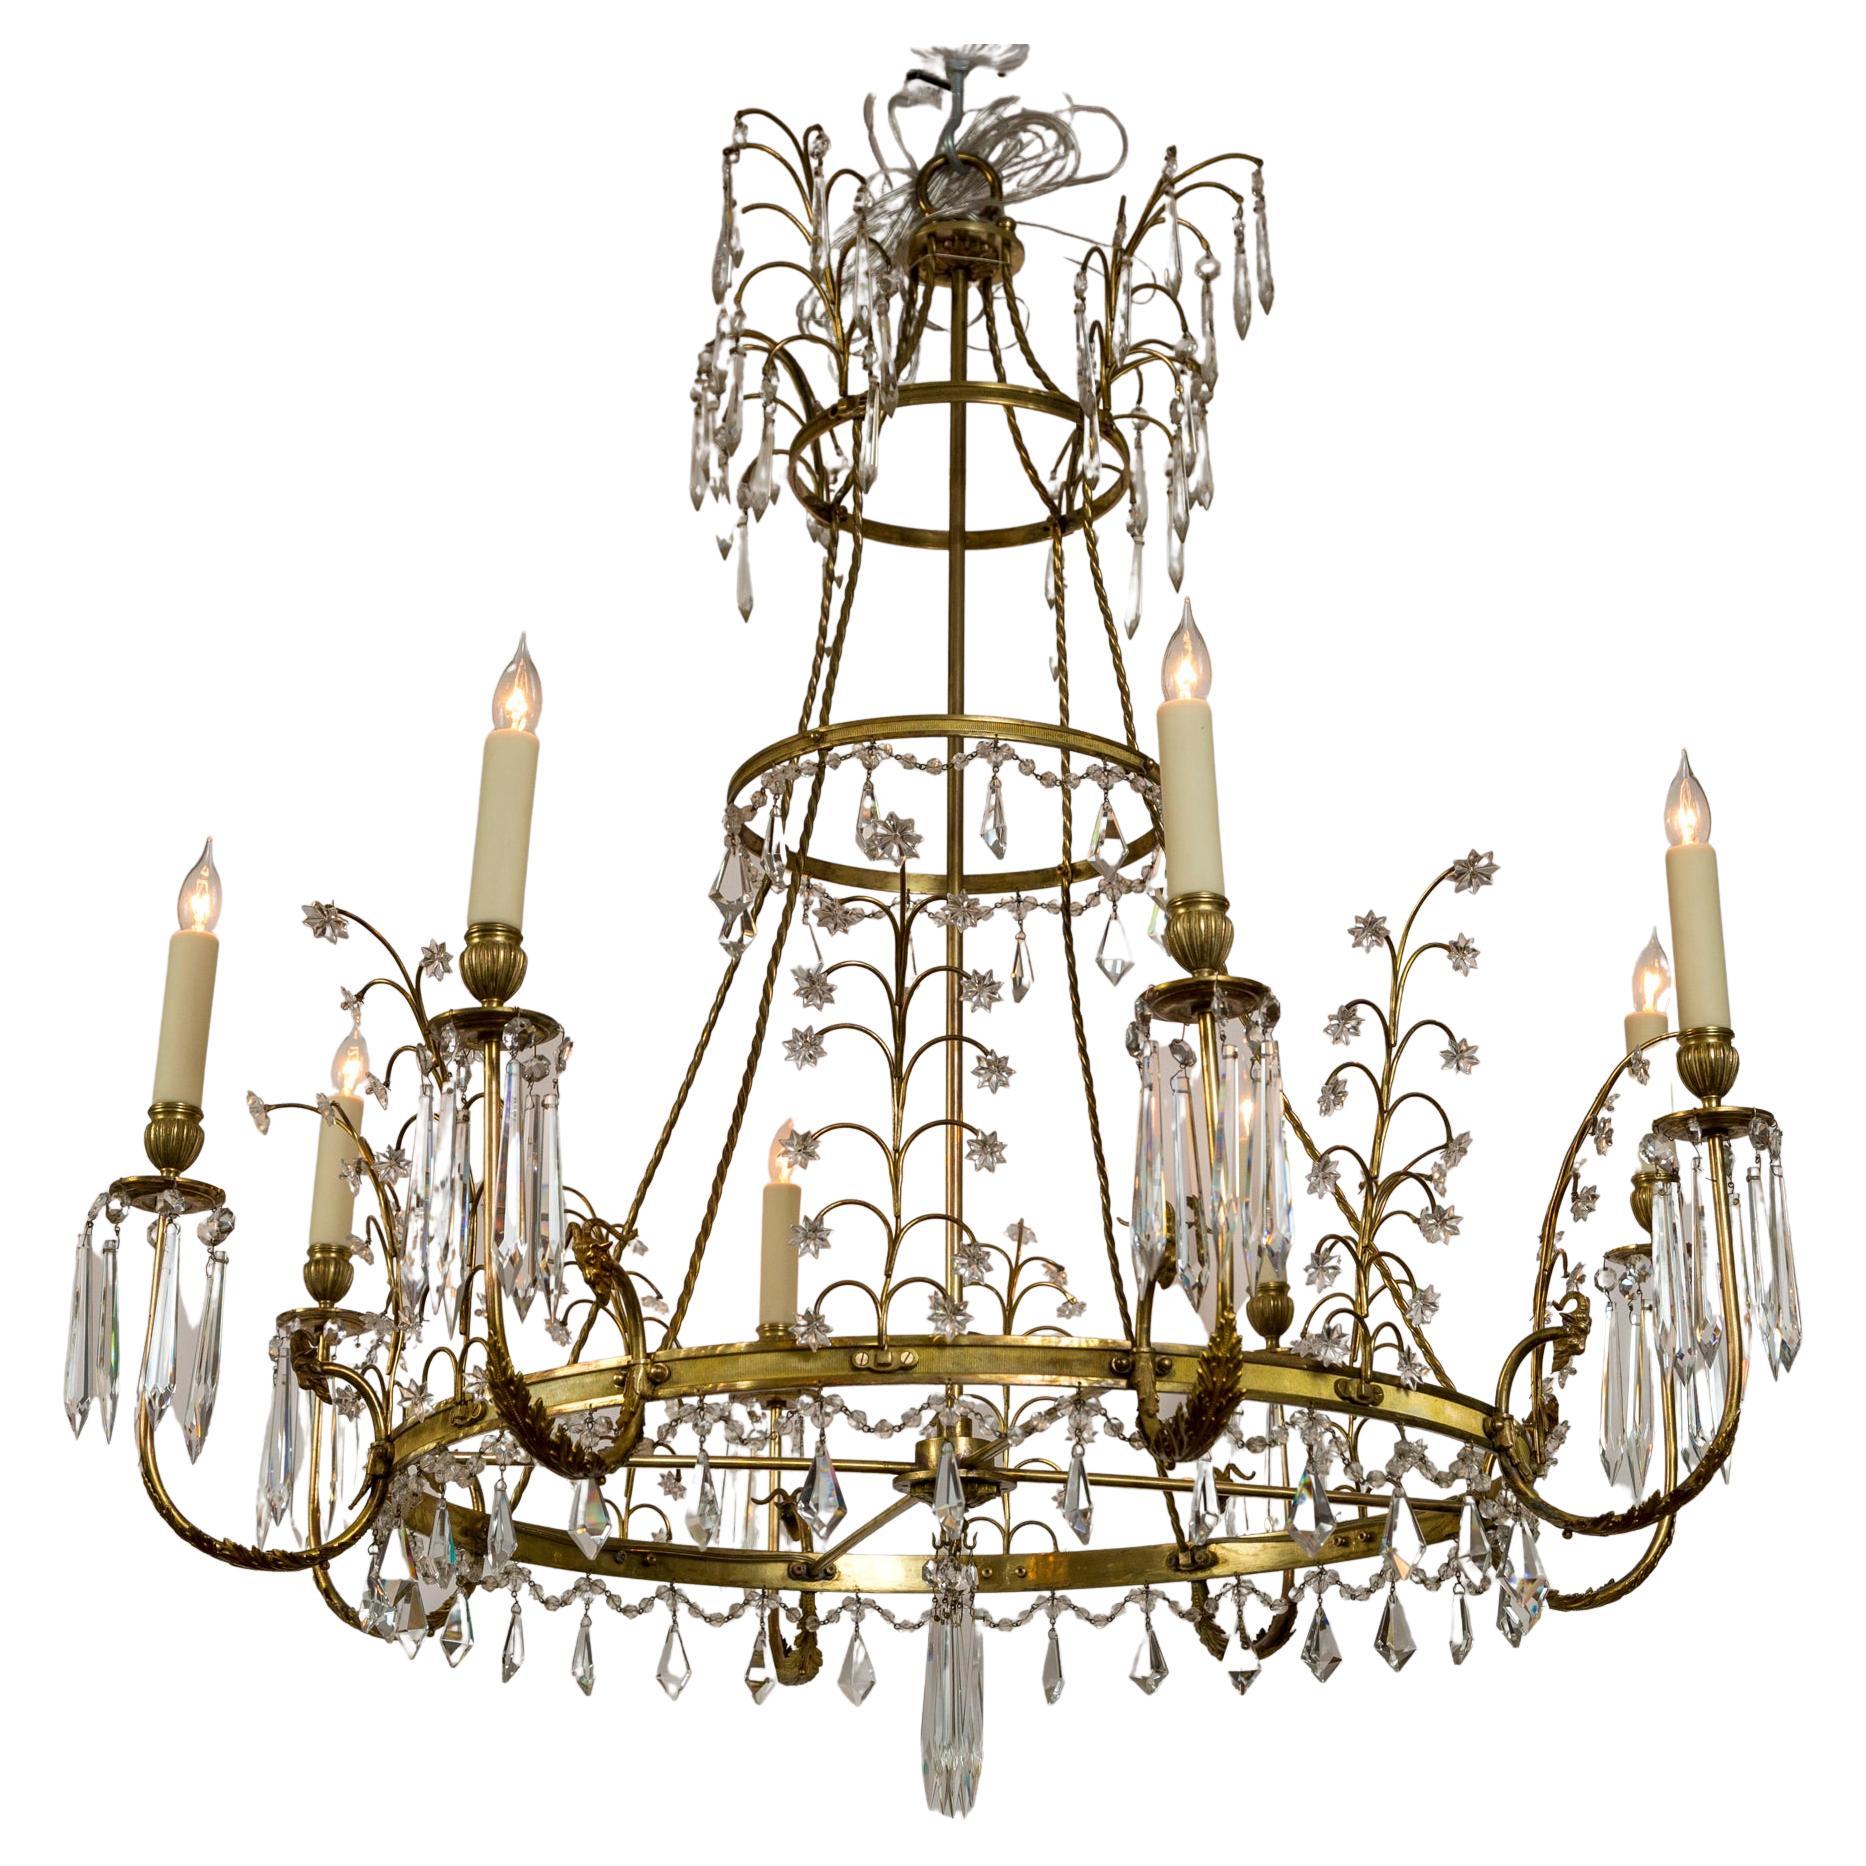 A light and airy Baltic 8-arm brass and bronze chandelier composed of three circular tiers; the top tier offering a dramatic waterfall effect of crystals falling from four brass branches while its lowest and largest circular tier greets you with 8